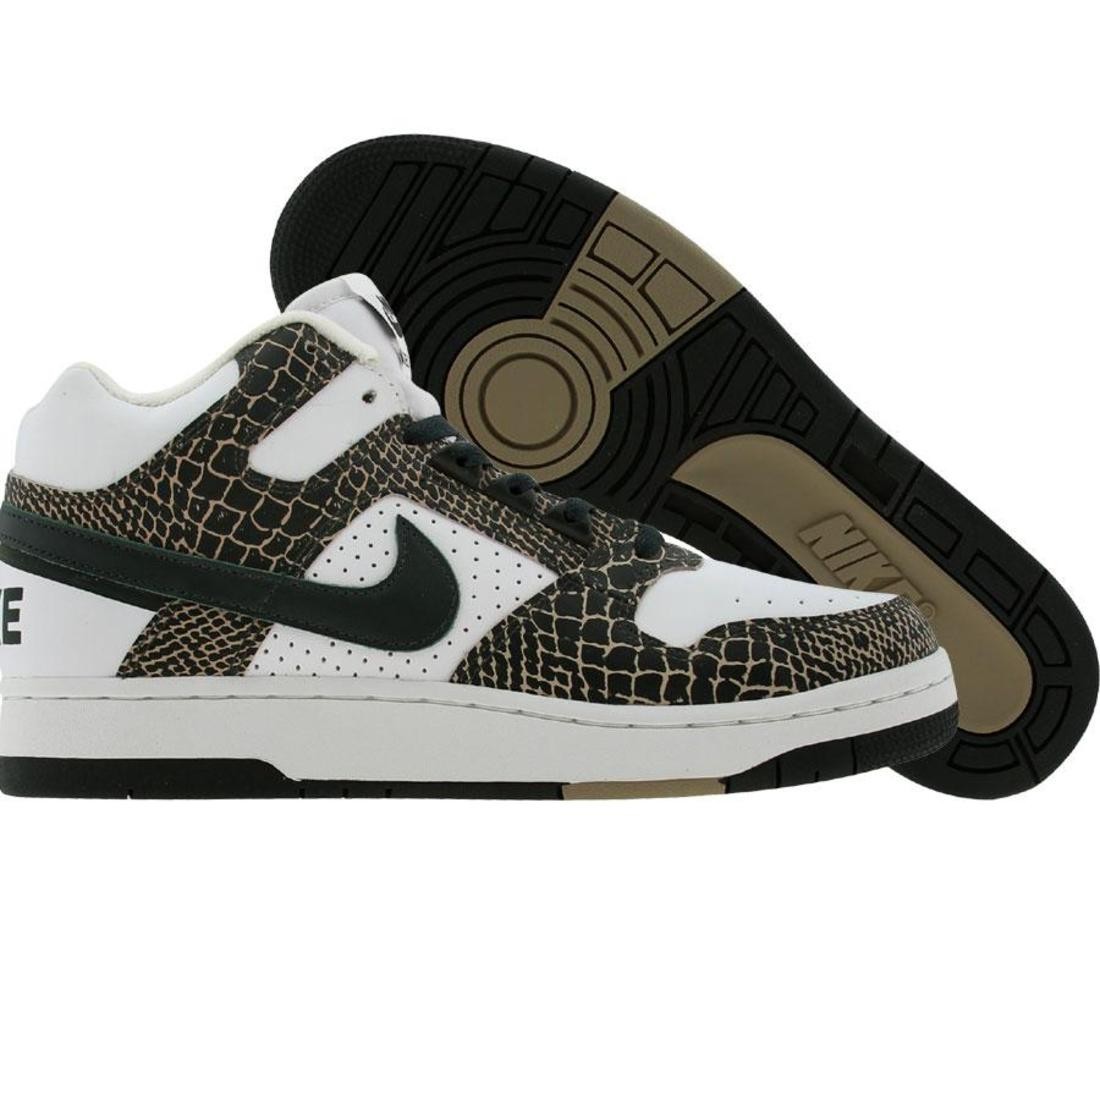 Nike Delta Force 3/4 Deluxe (Snake Edition)